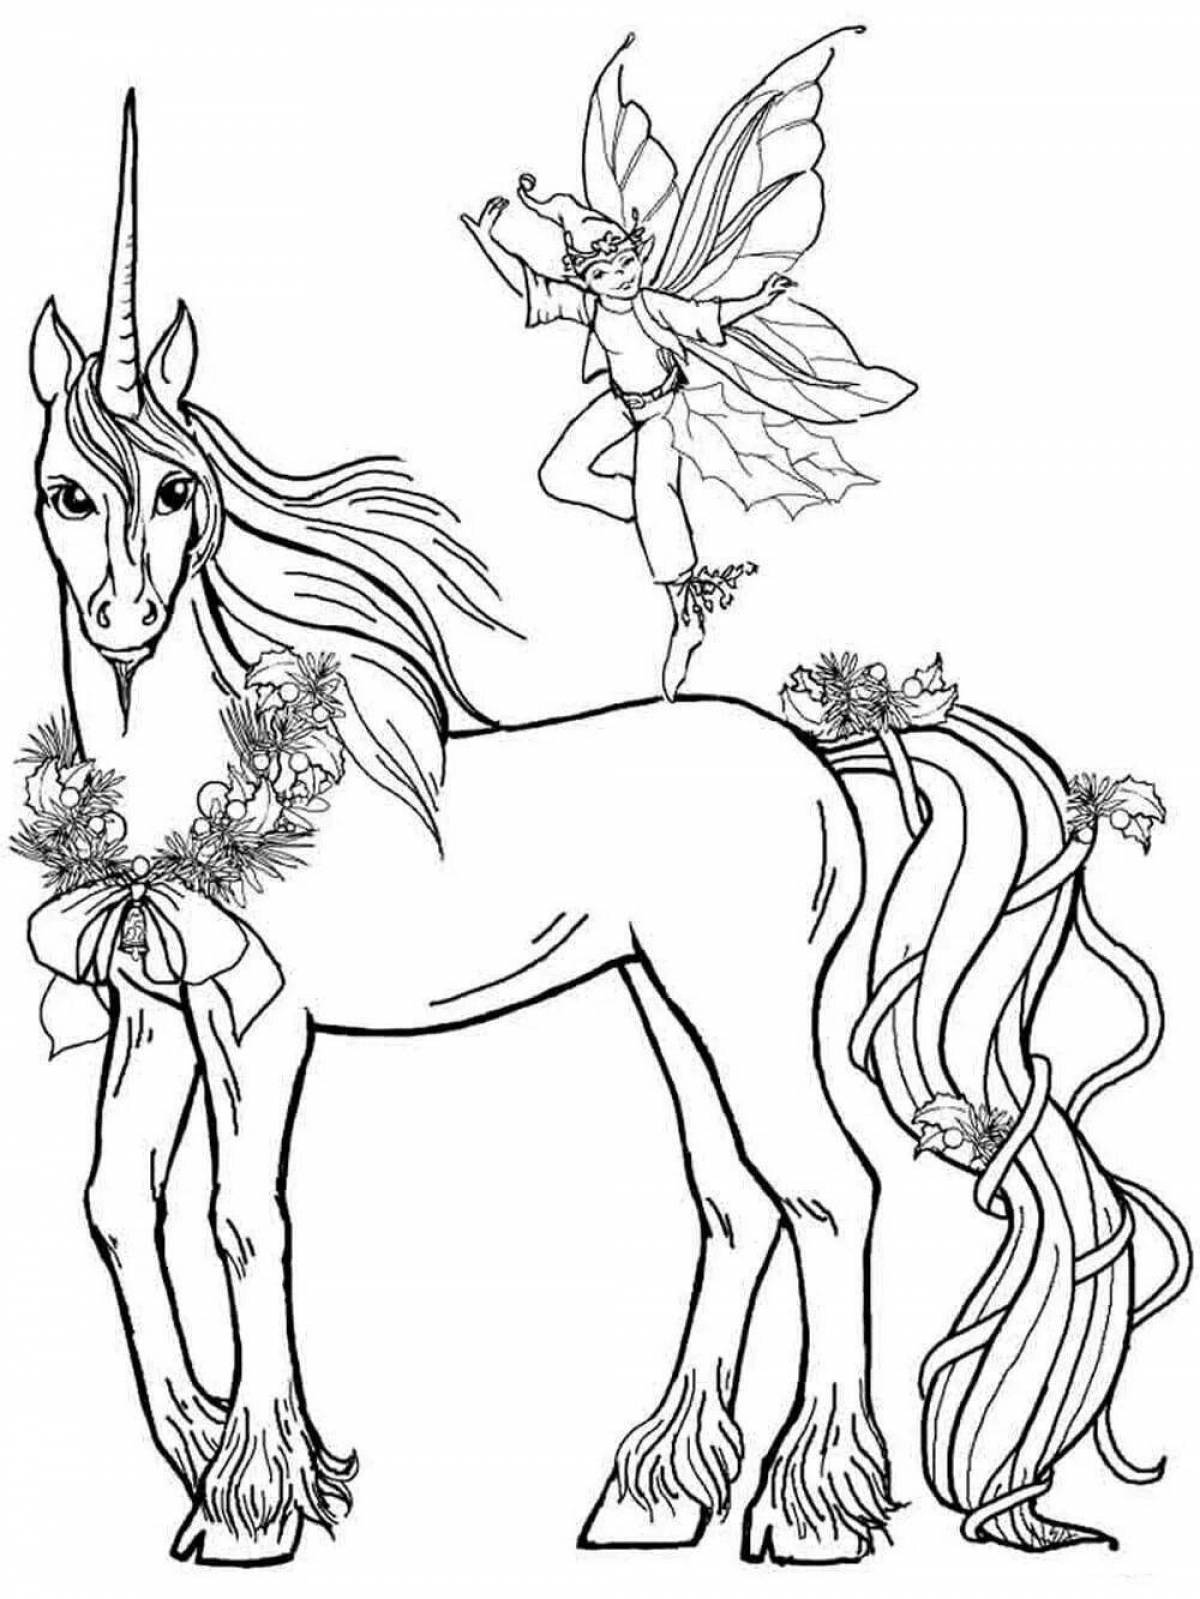 Fun coloring page one для малышей